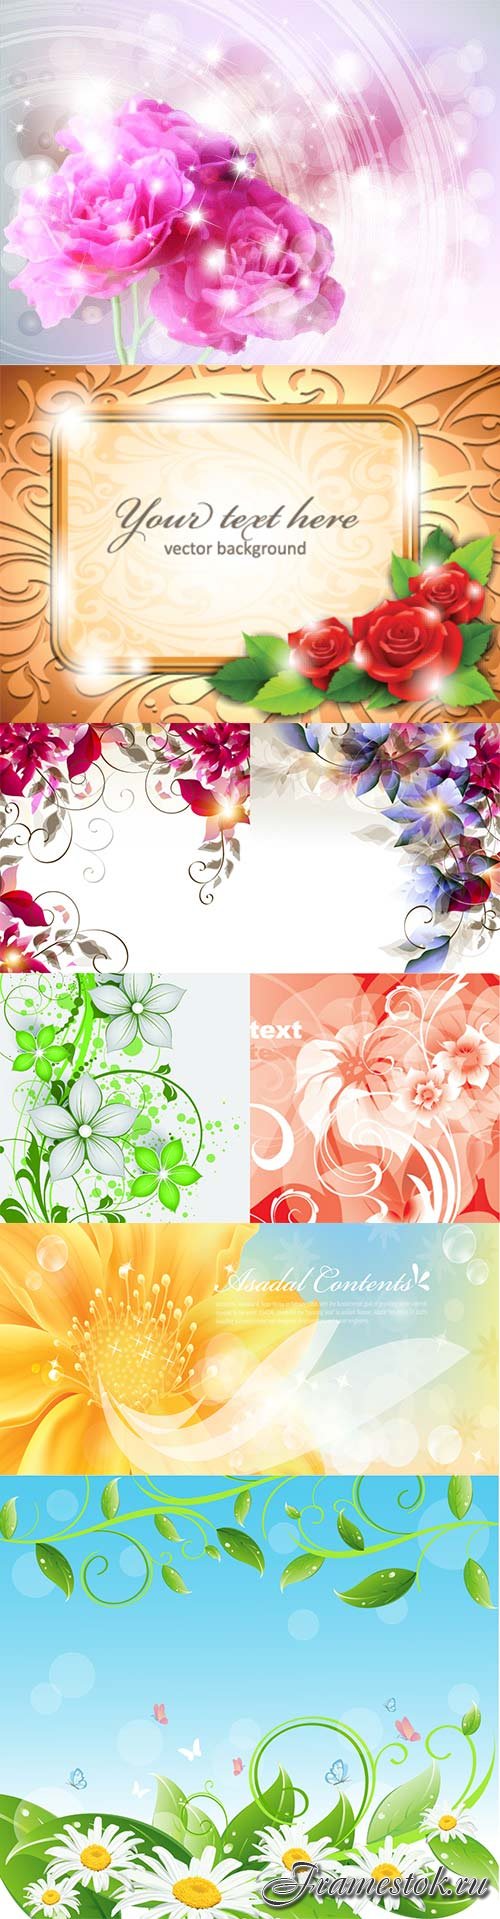 Awesome vector flowers - 13